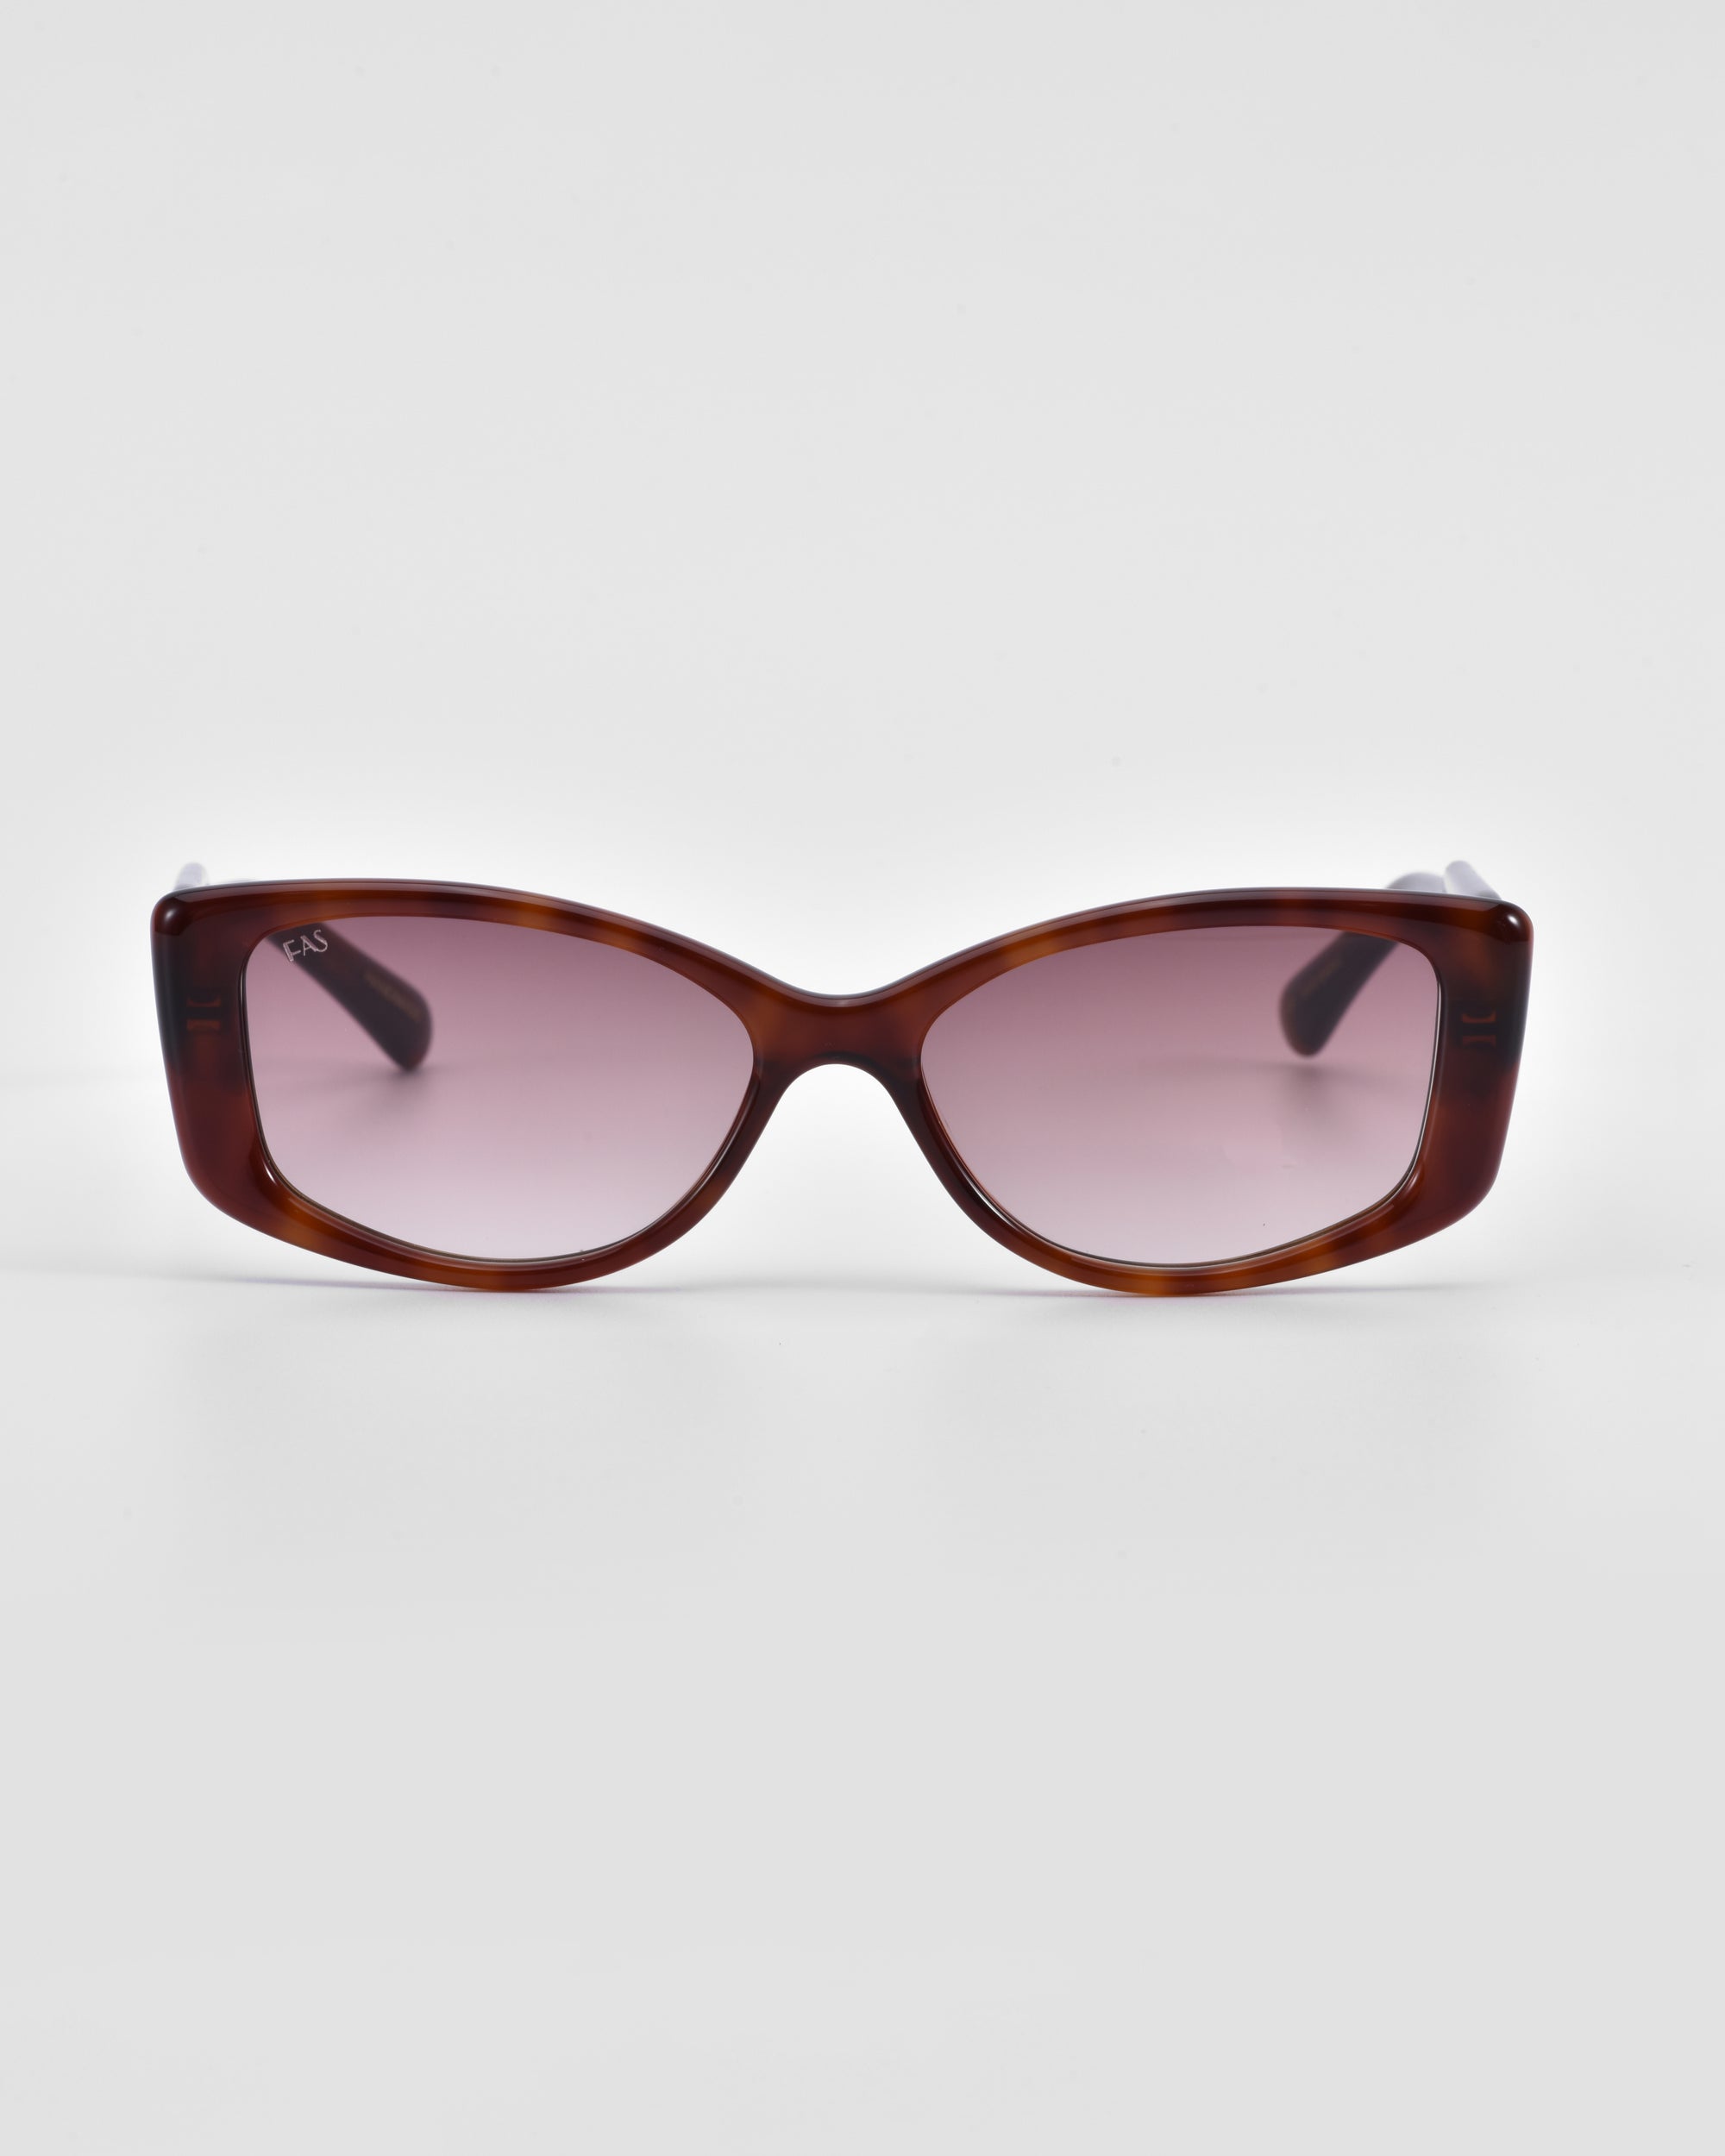 A pair of Mene sunglasses by For Art's Sake® with a brown, glossy frame and rectangular lenses that have a subtle pinkish tint. The arms of the glasses are obscured but appear to match the frame in color. White background.